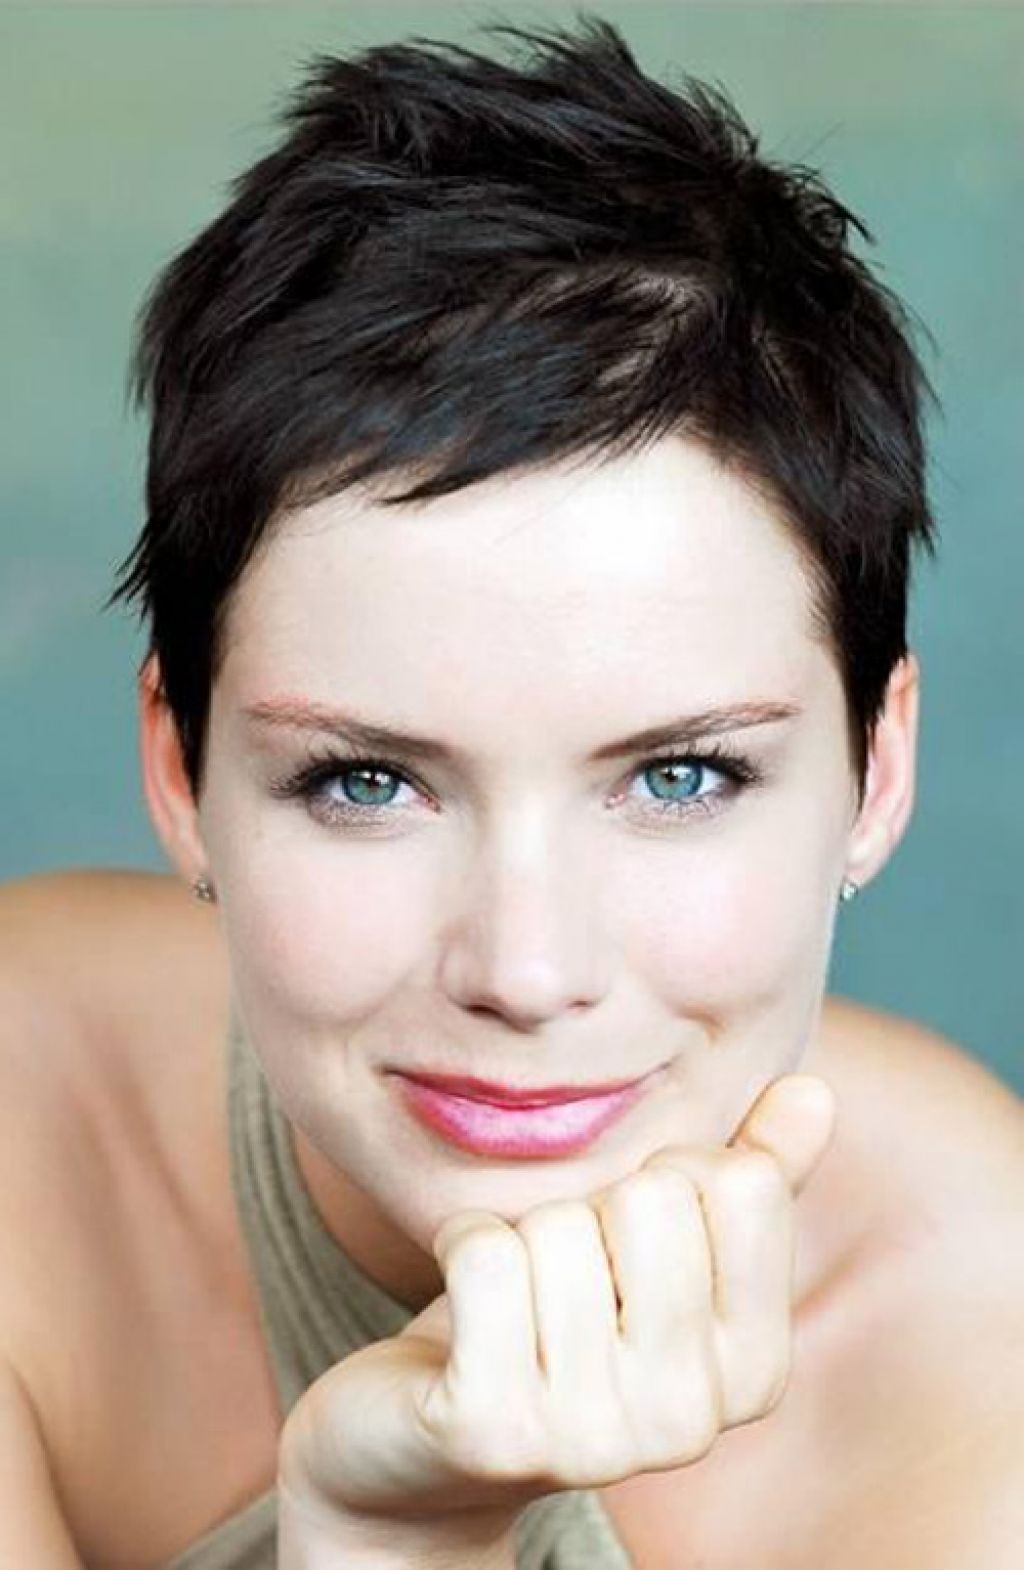 Super Short Haircuts For Women
 Why Do Super Short Hairstyles Look So Beautiful on Older